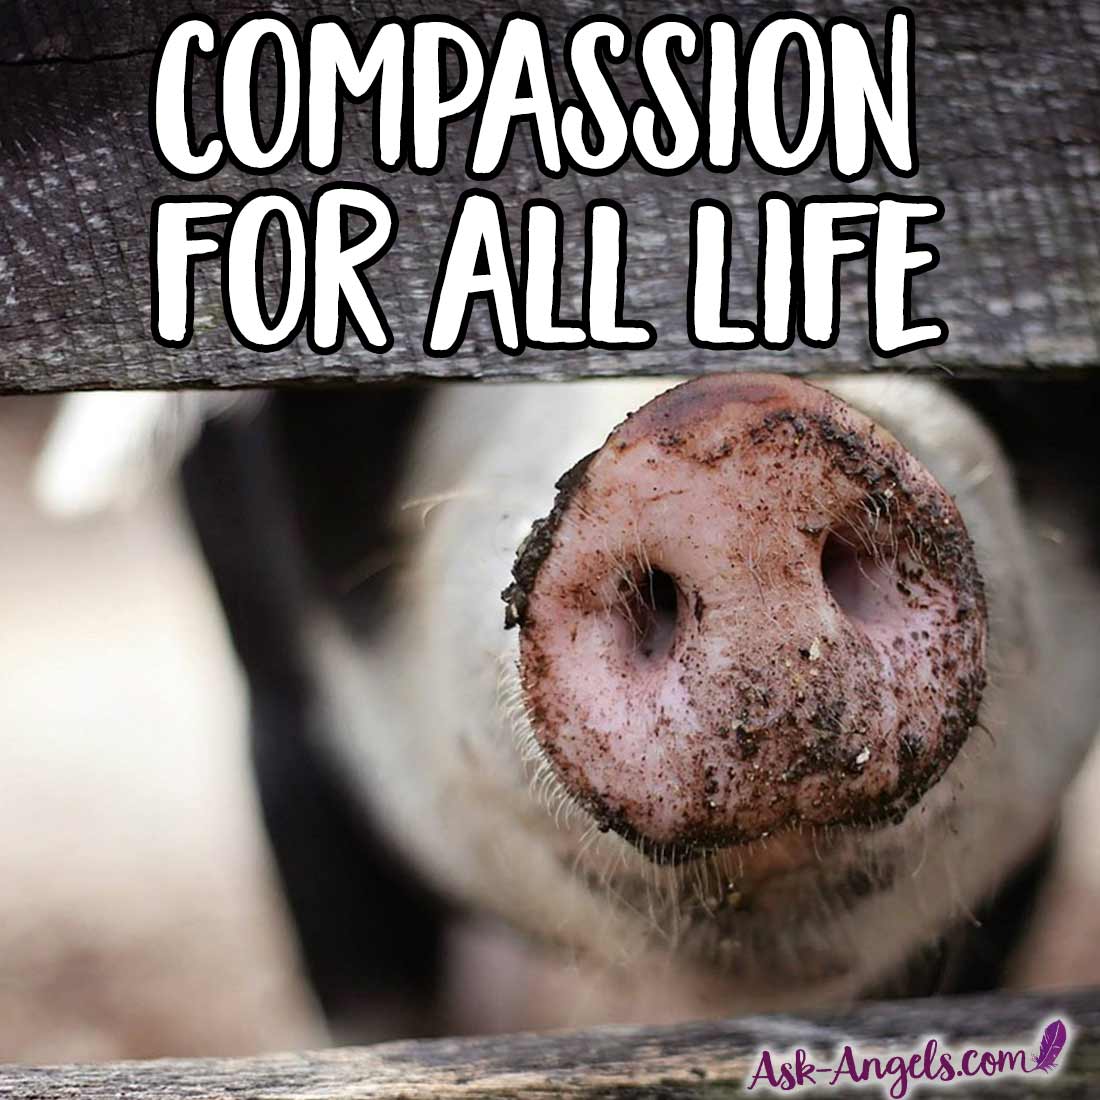 Compassion for All Life